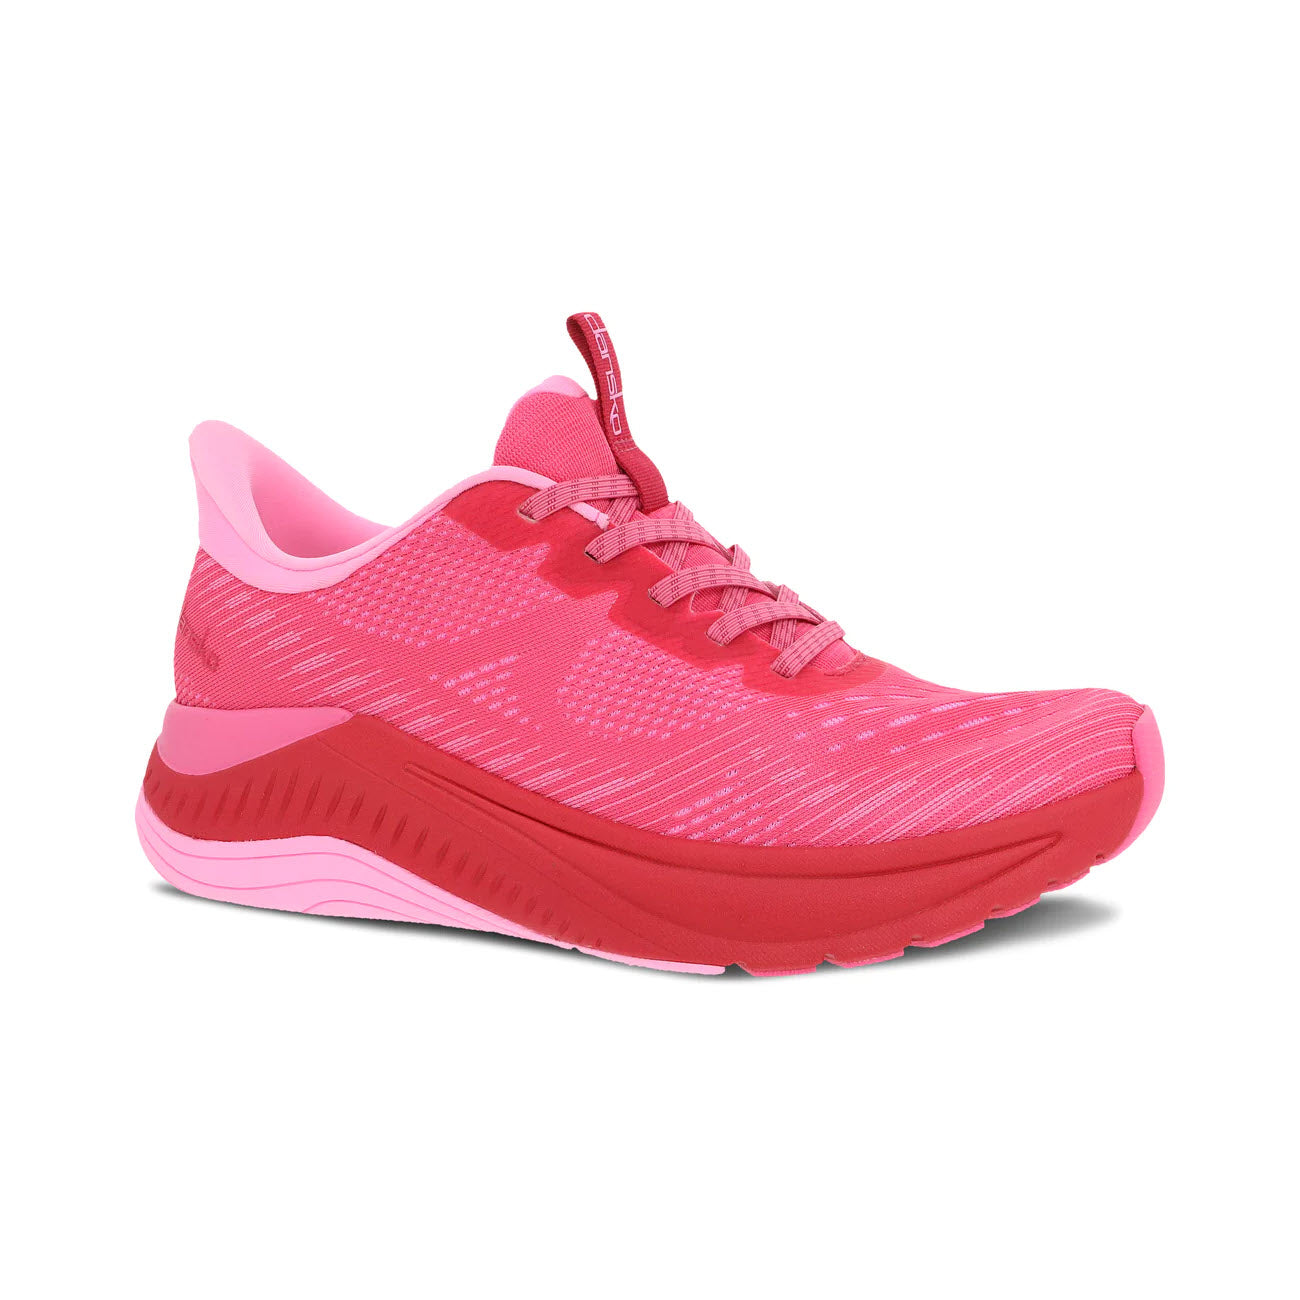 Bright pink high-performance DANSKO PEONY HOT PINK - WOMENS walking sneaker with a mesh upper and a thick sole, viewed from the side.